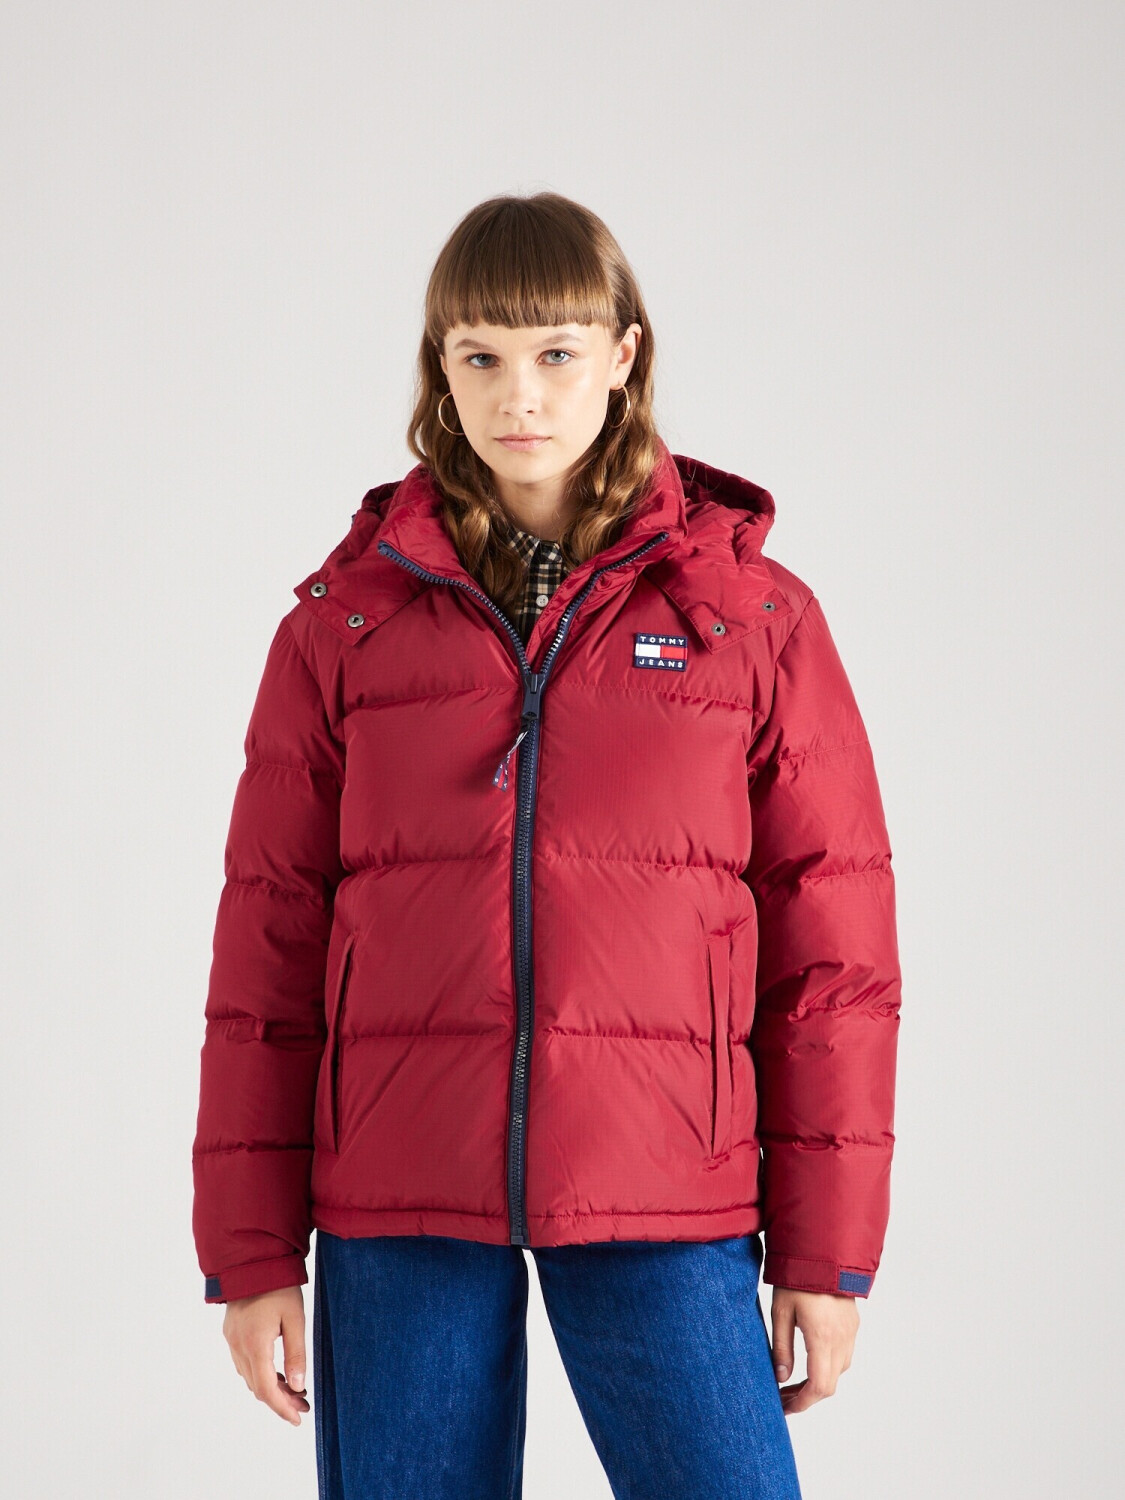 Buy Tommy Hilfiger Alaska Puffer Jacket (DW0DW14661) rouge from £159.20  (Today) – Best Deals on